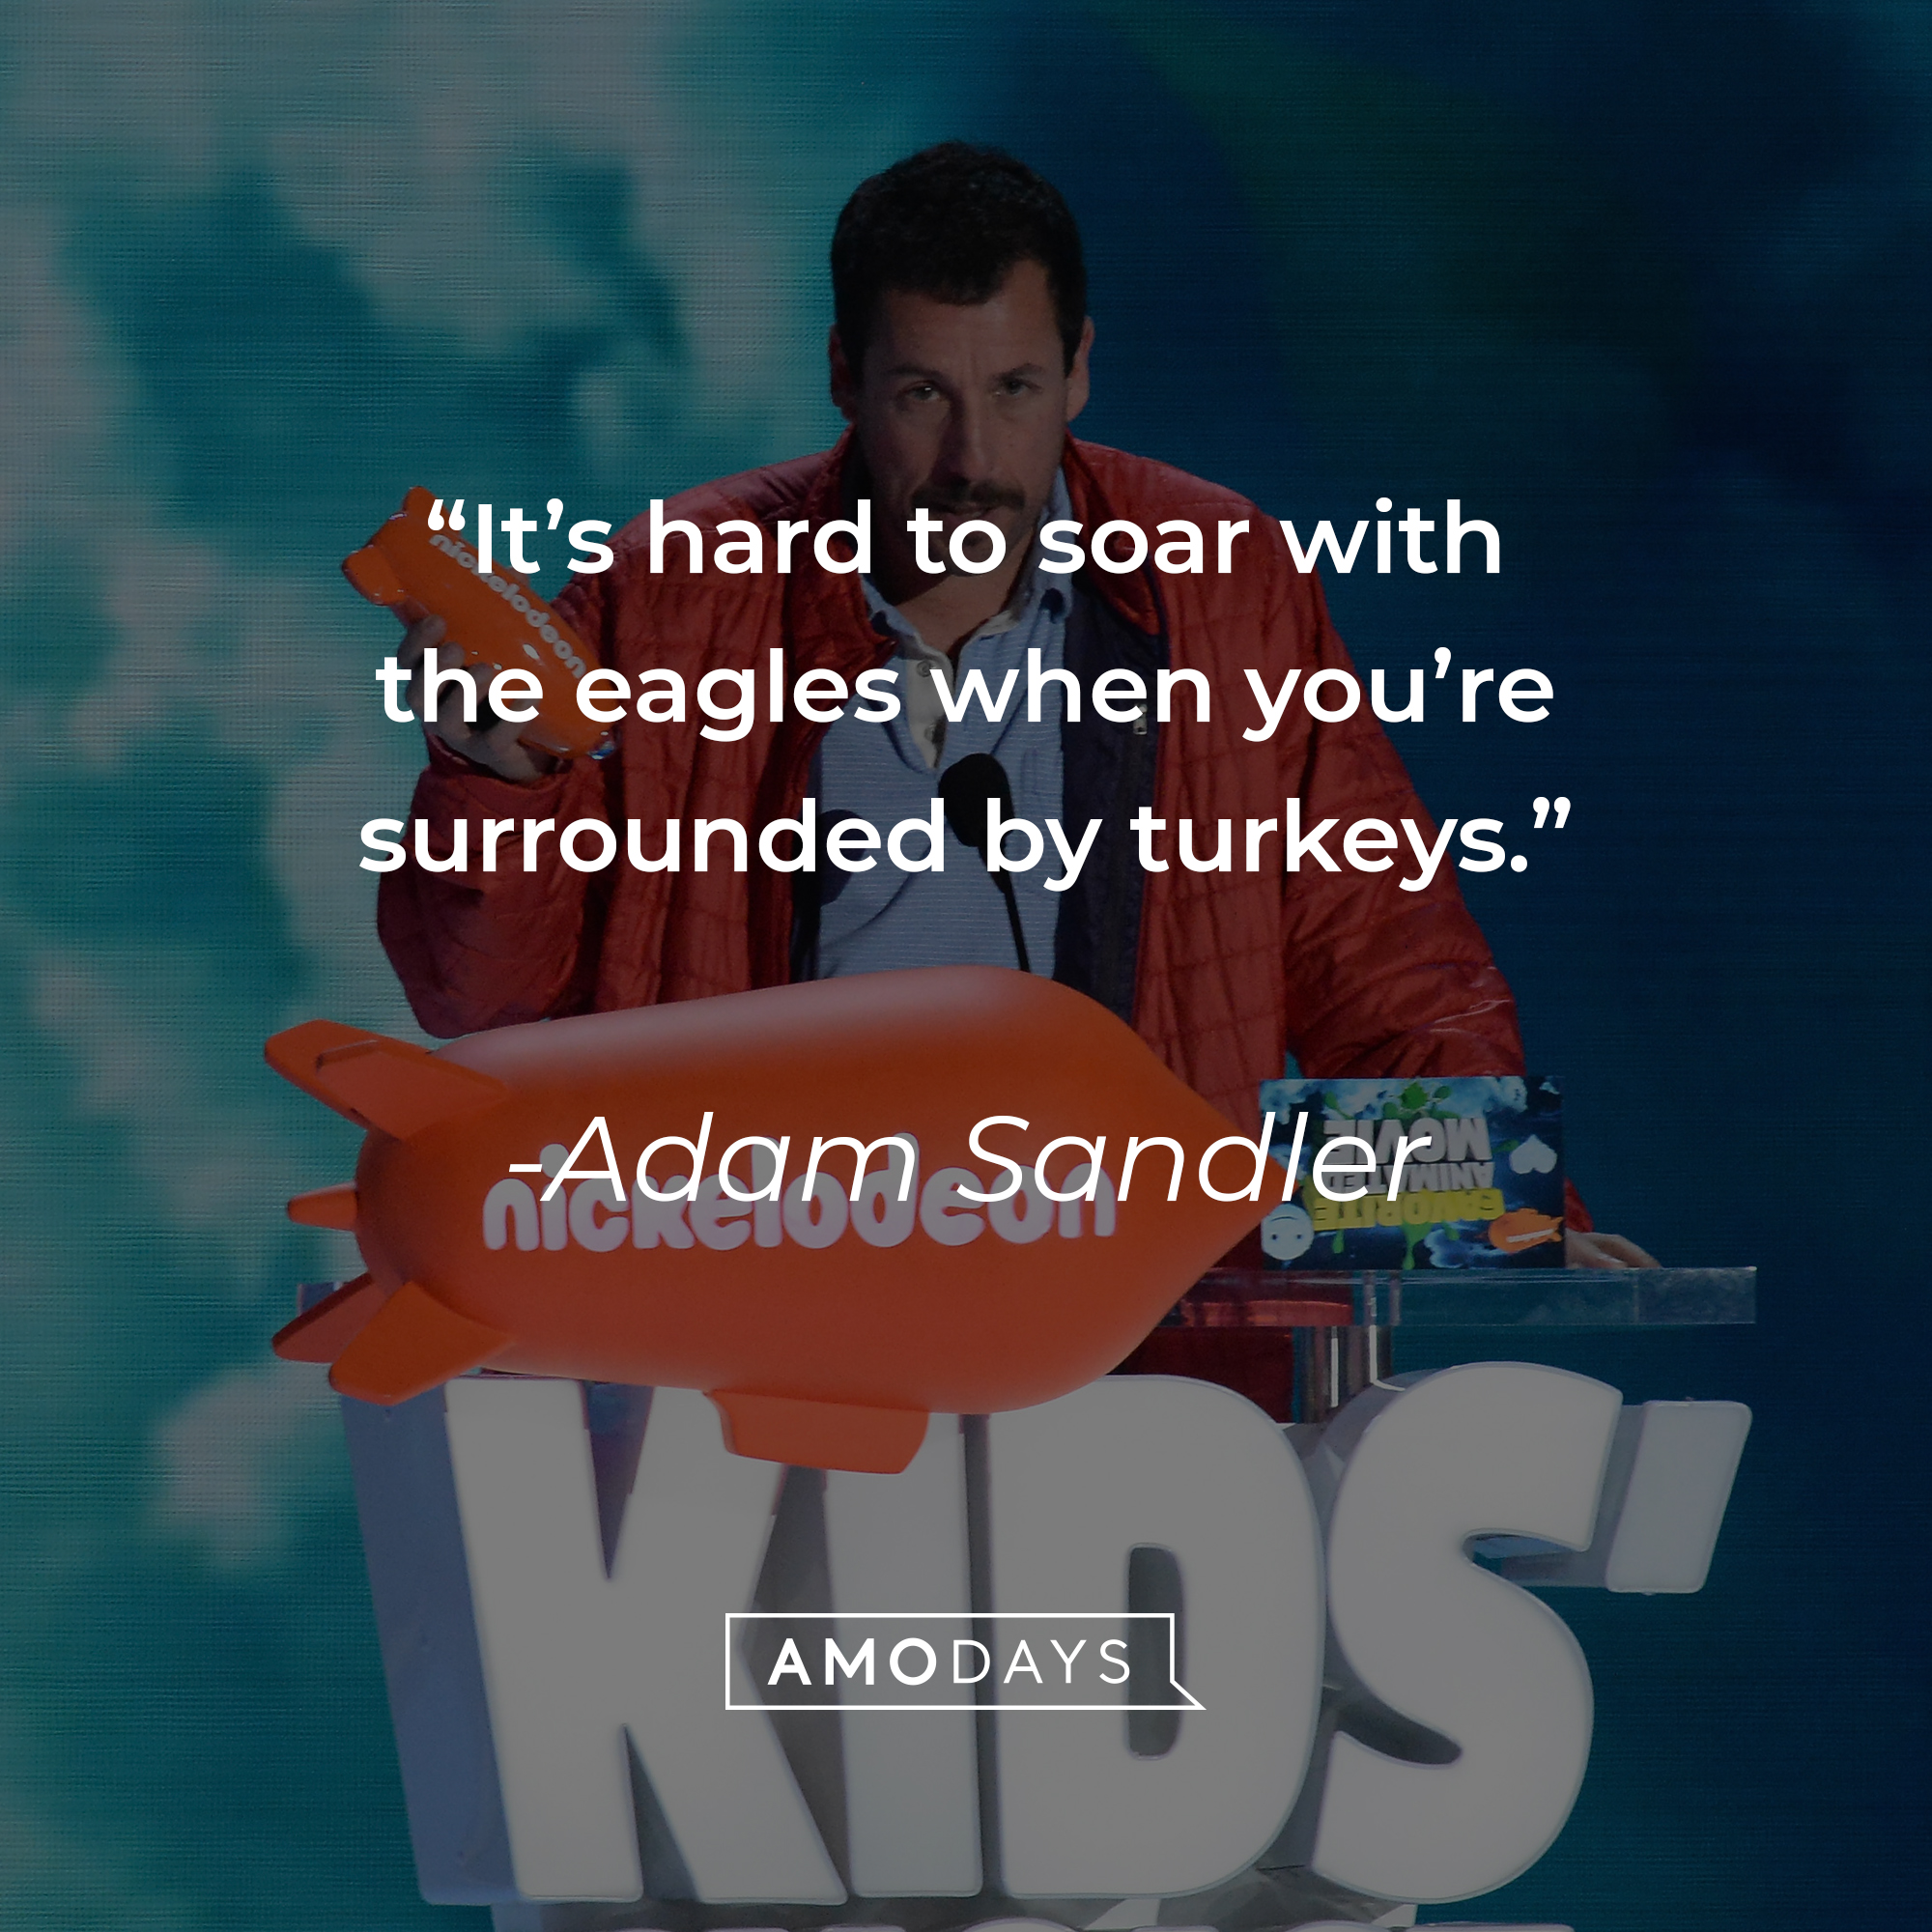 Adam Sandler's quote: “It’s hard to soar with the eagles when you’re surrounded by turkeys.” | Source: Getty Images